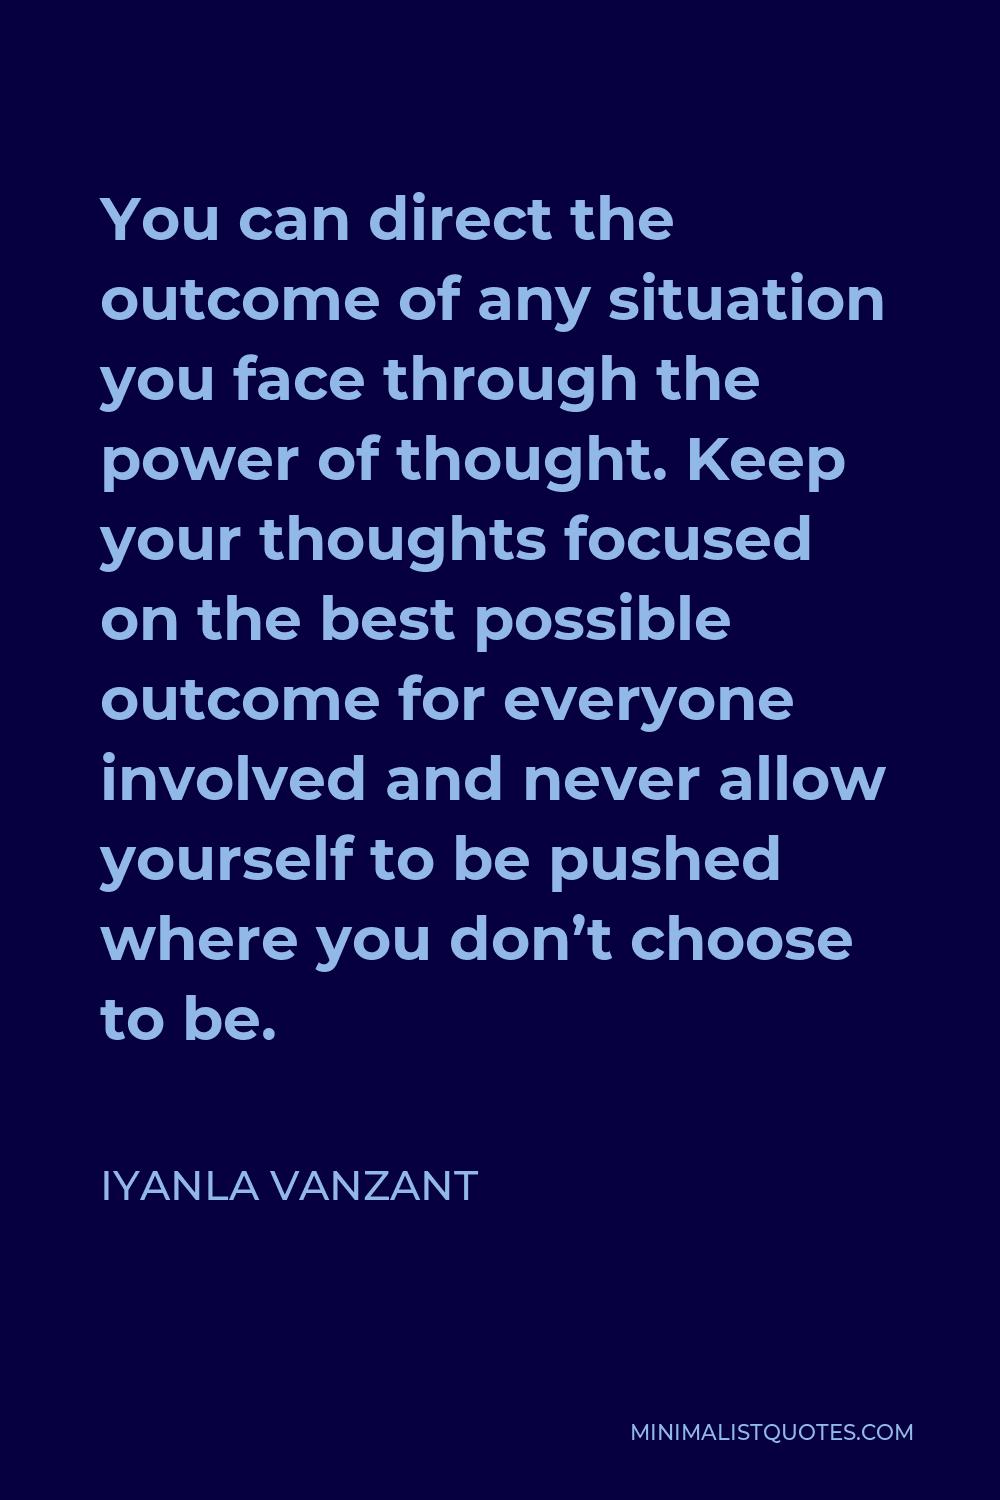 Iyanla Vanzant Quote - You can direct the outcome of any situation you face through the power of thought. Keep your thoughts focused on the best possible outcome for everyone involved and never allow yourself to be pushed where you don’t choose to be.